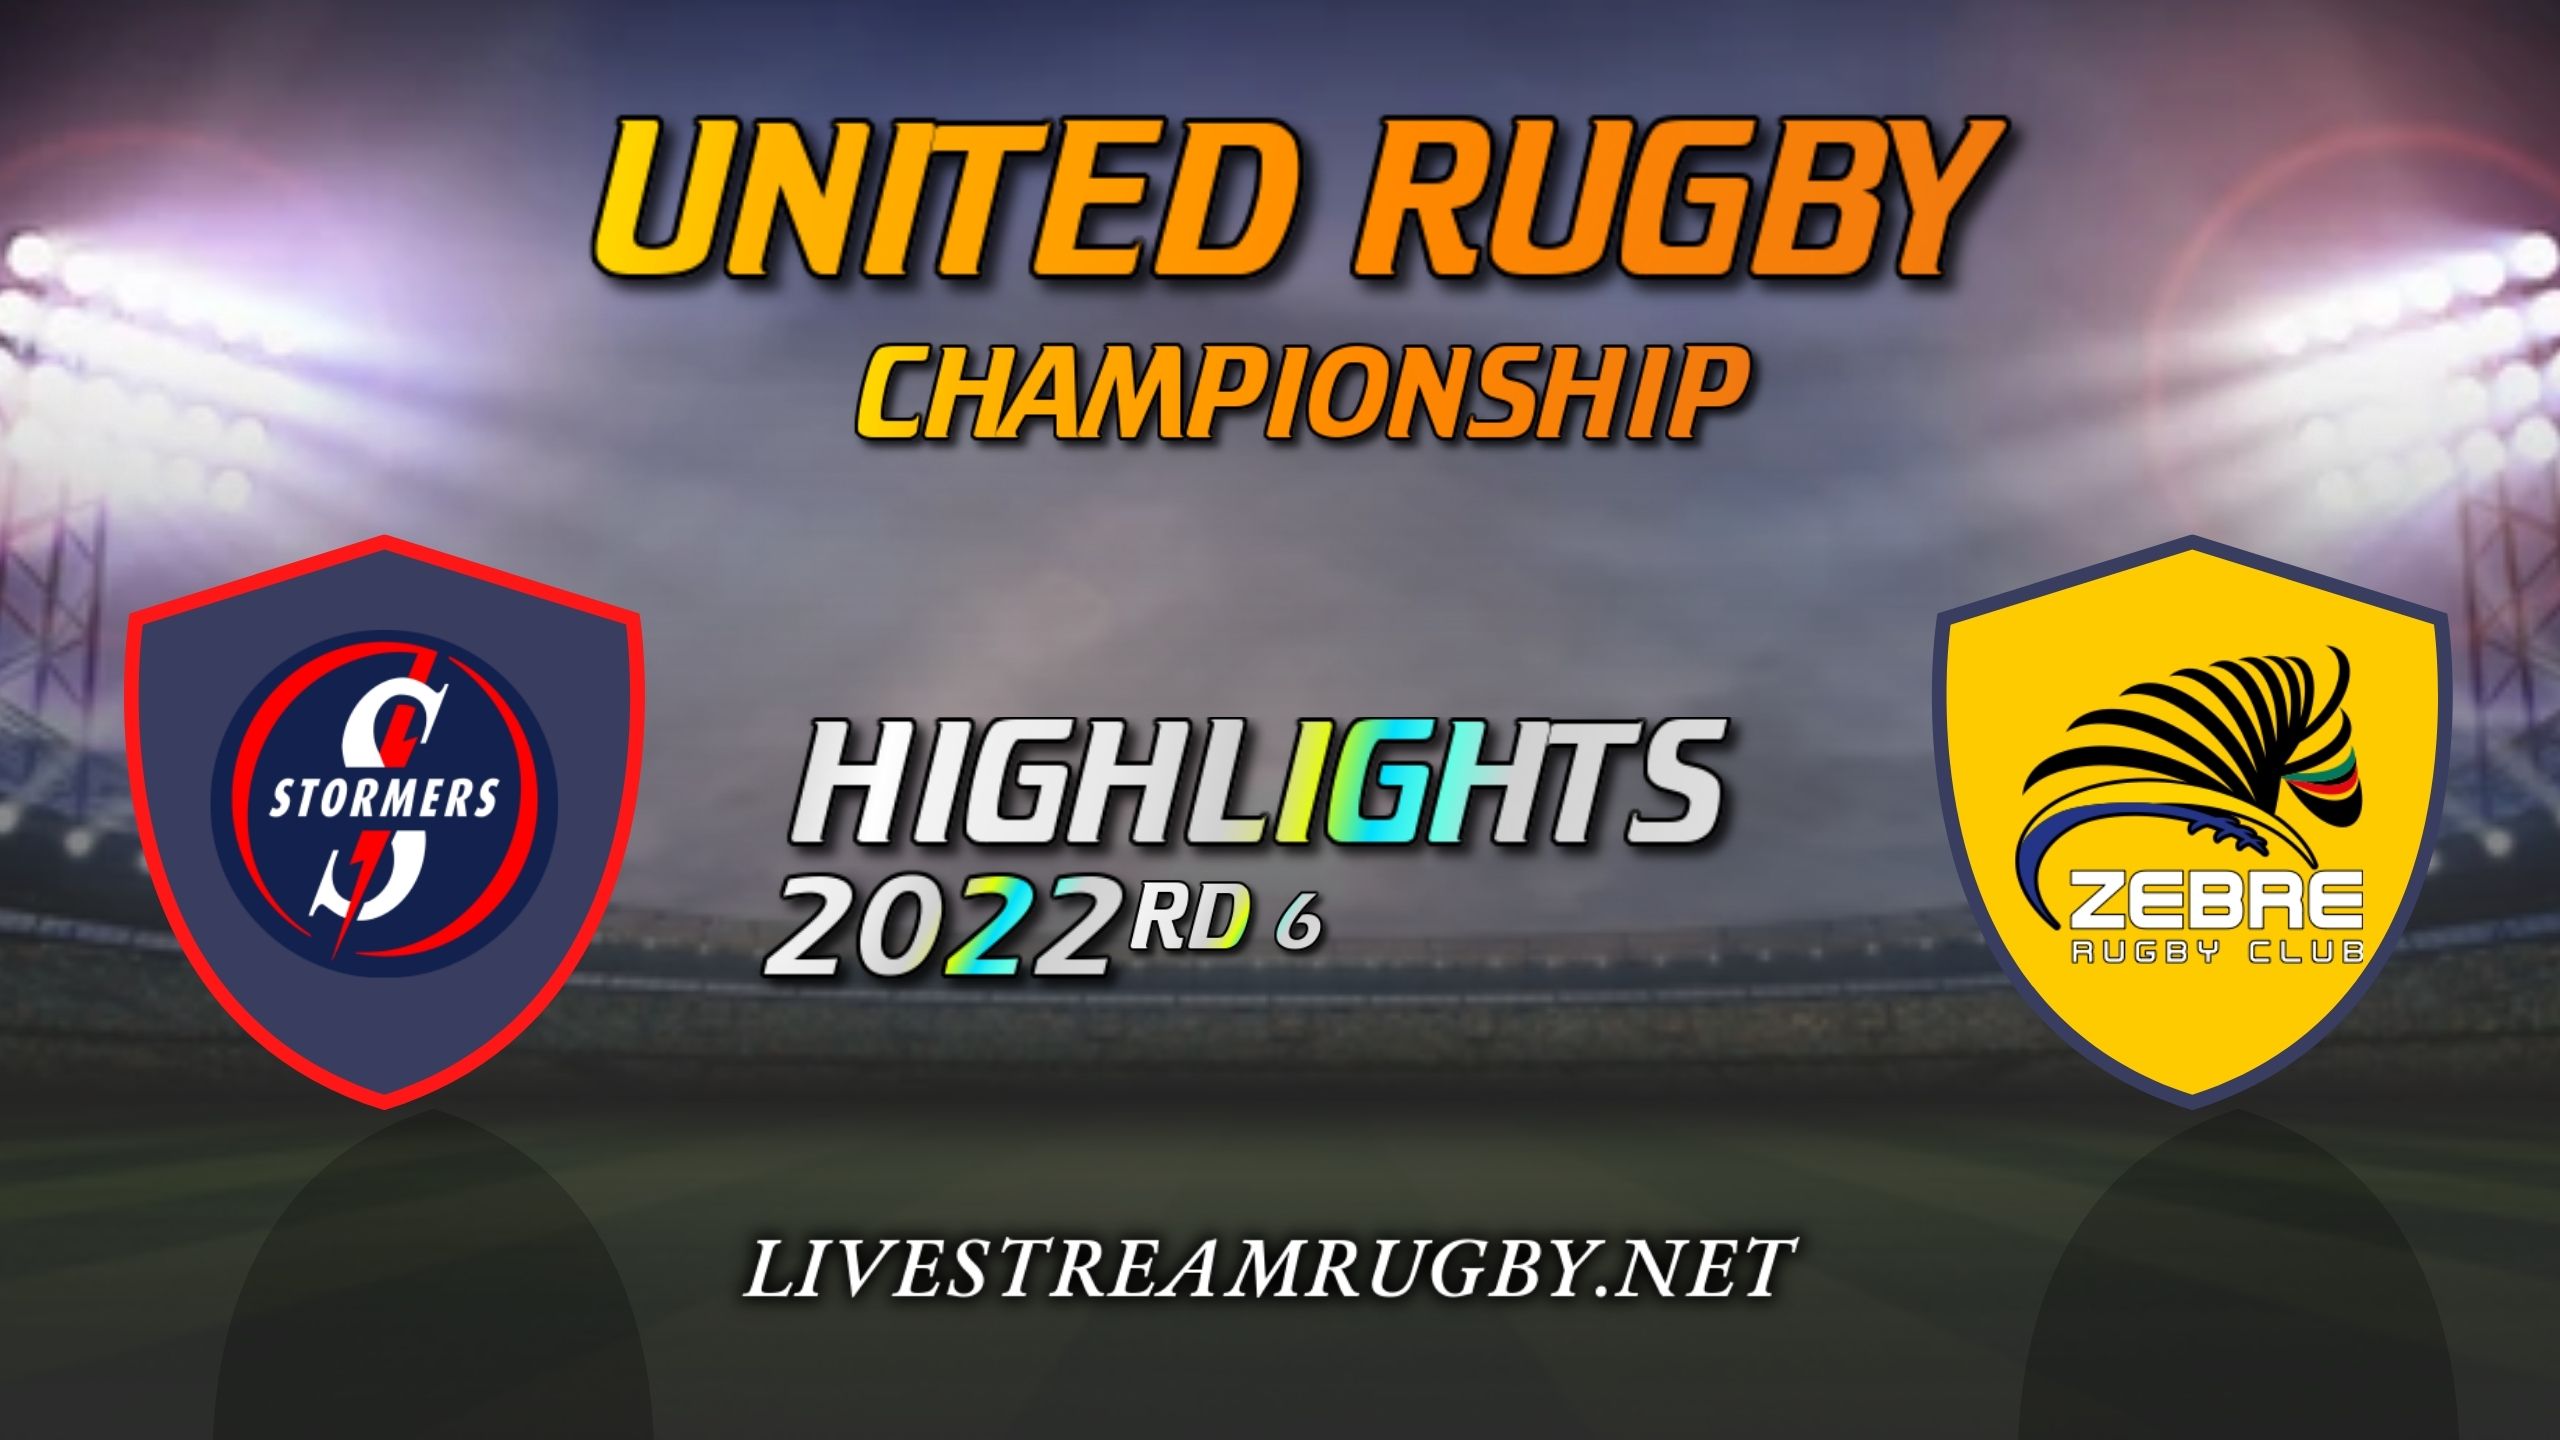 Stormers Vs Zebre Highlights 2022 Rd 6 United Rugby